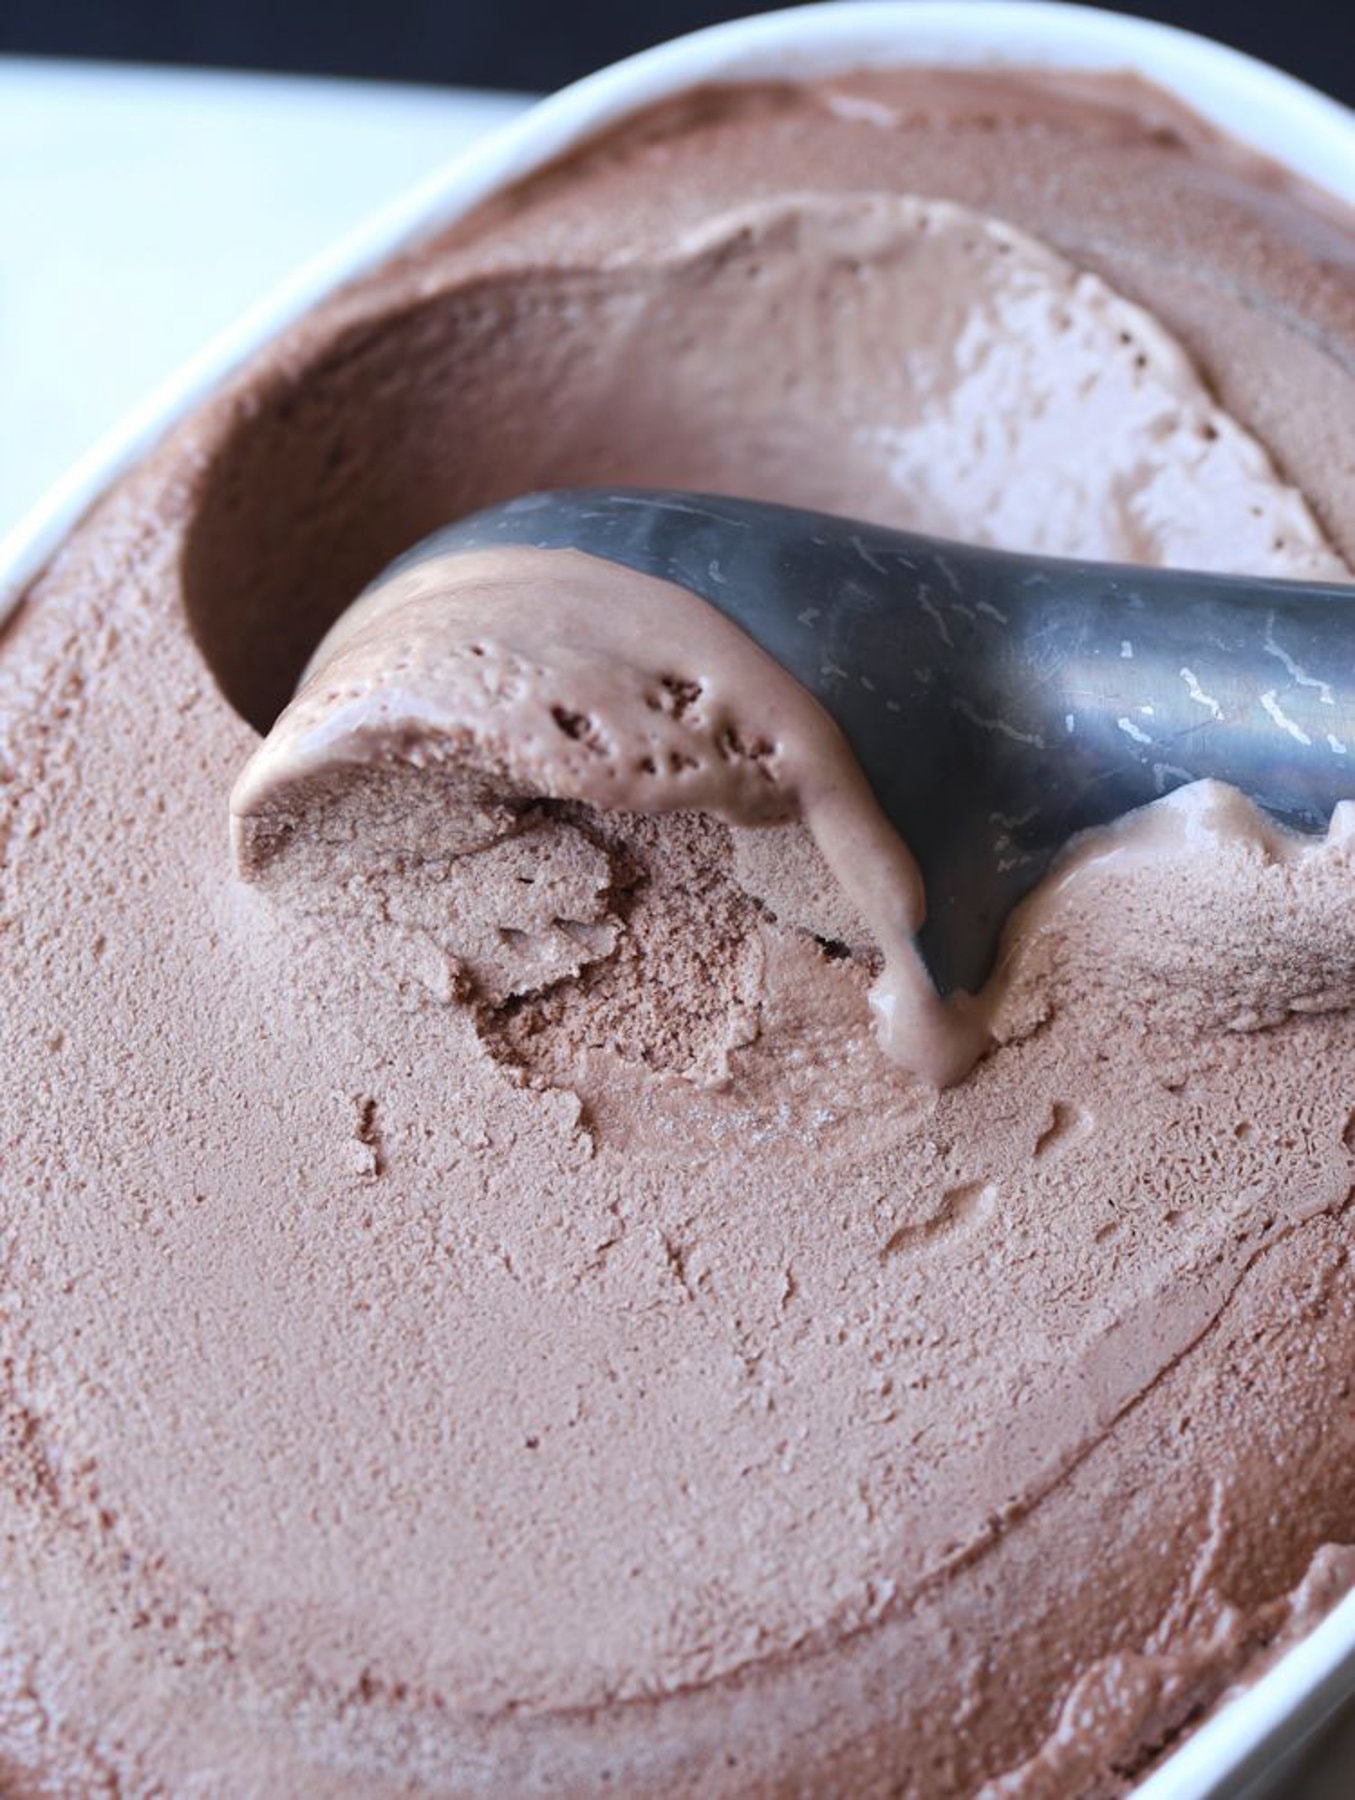 Chocolate ice cream scooped out of a tub